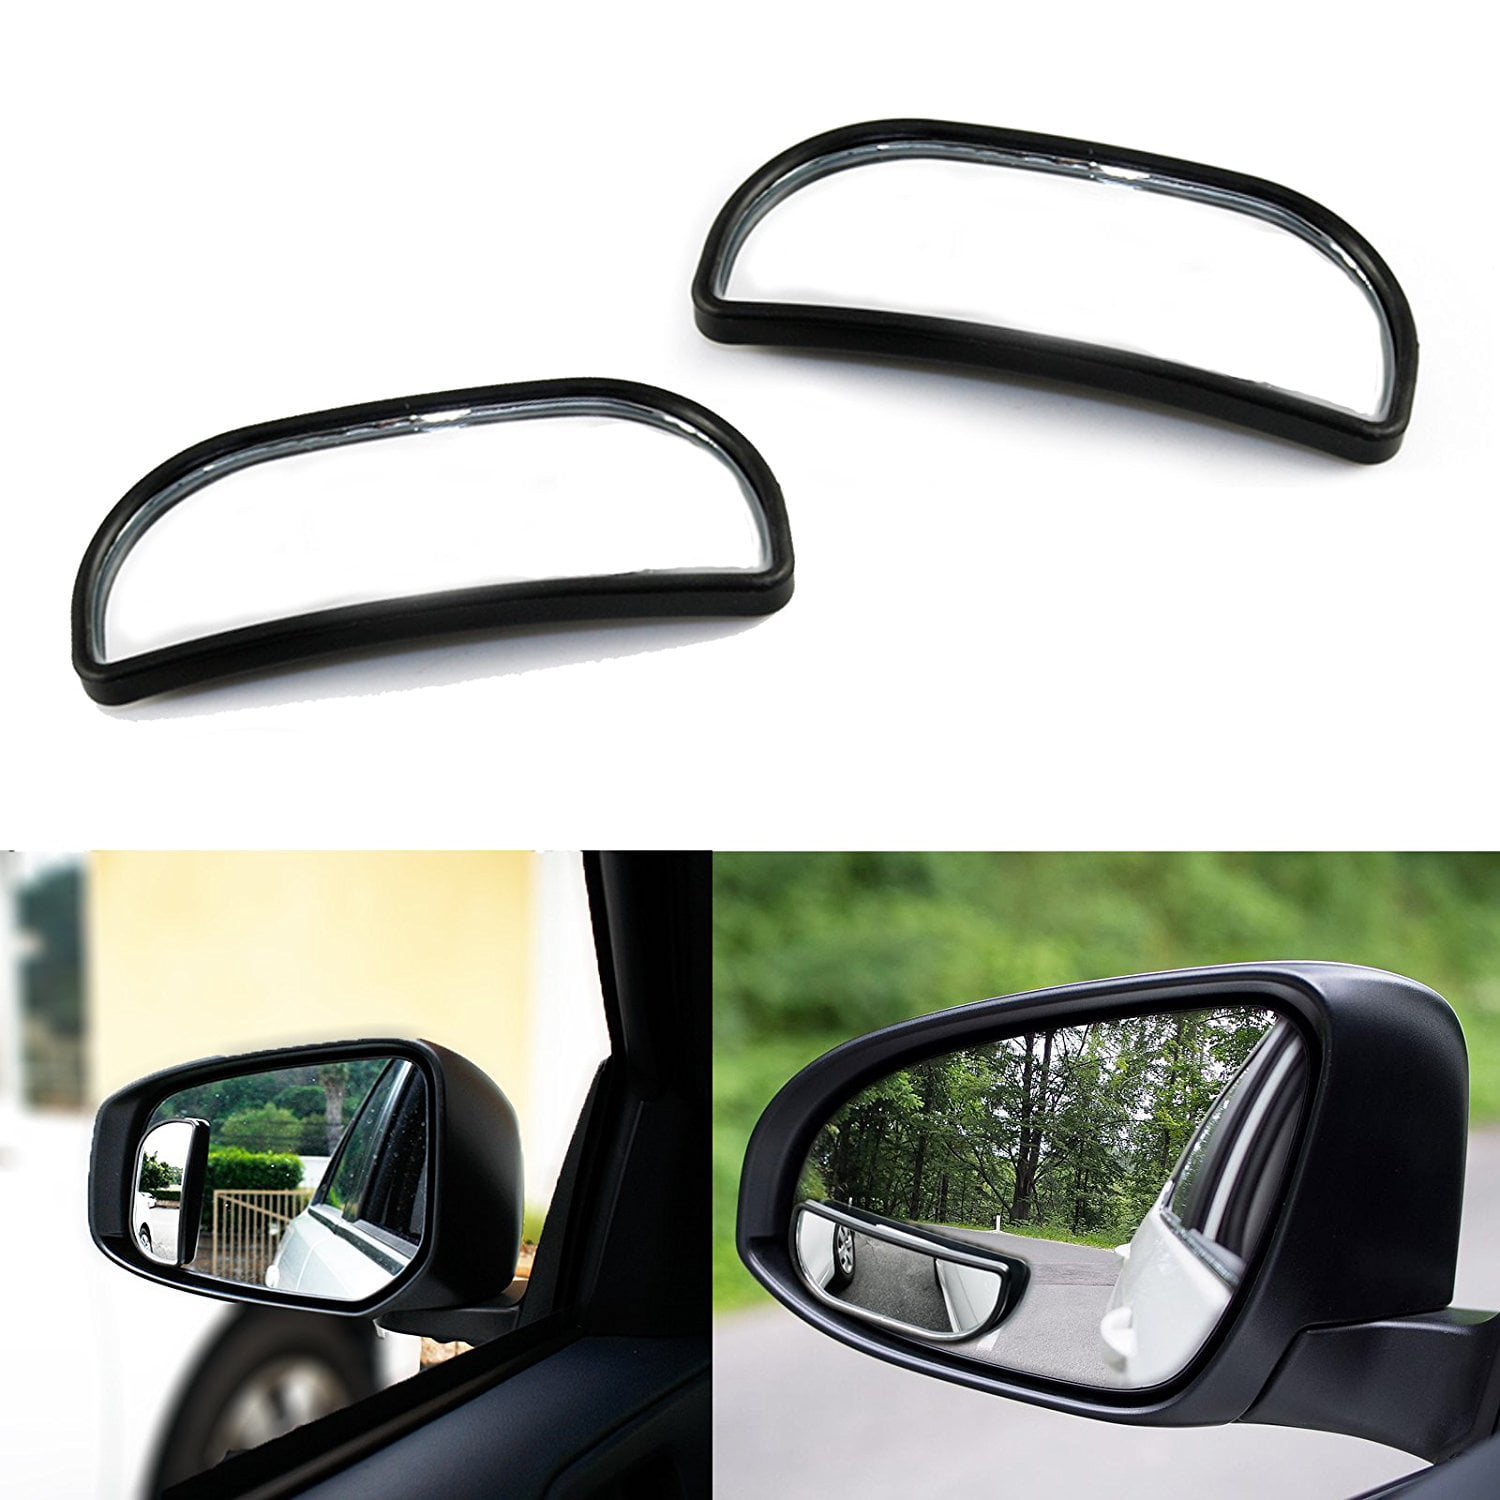 Blind Spot Mirror 2 Pcs Square Stick On Rear View Convex Side Wide Angle with DUAL Adjustable Mirrors For Car Truck SUVs Motorcycle 